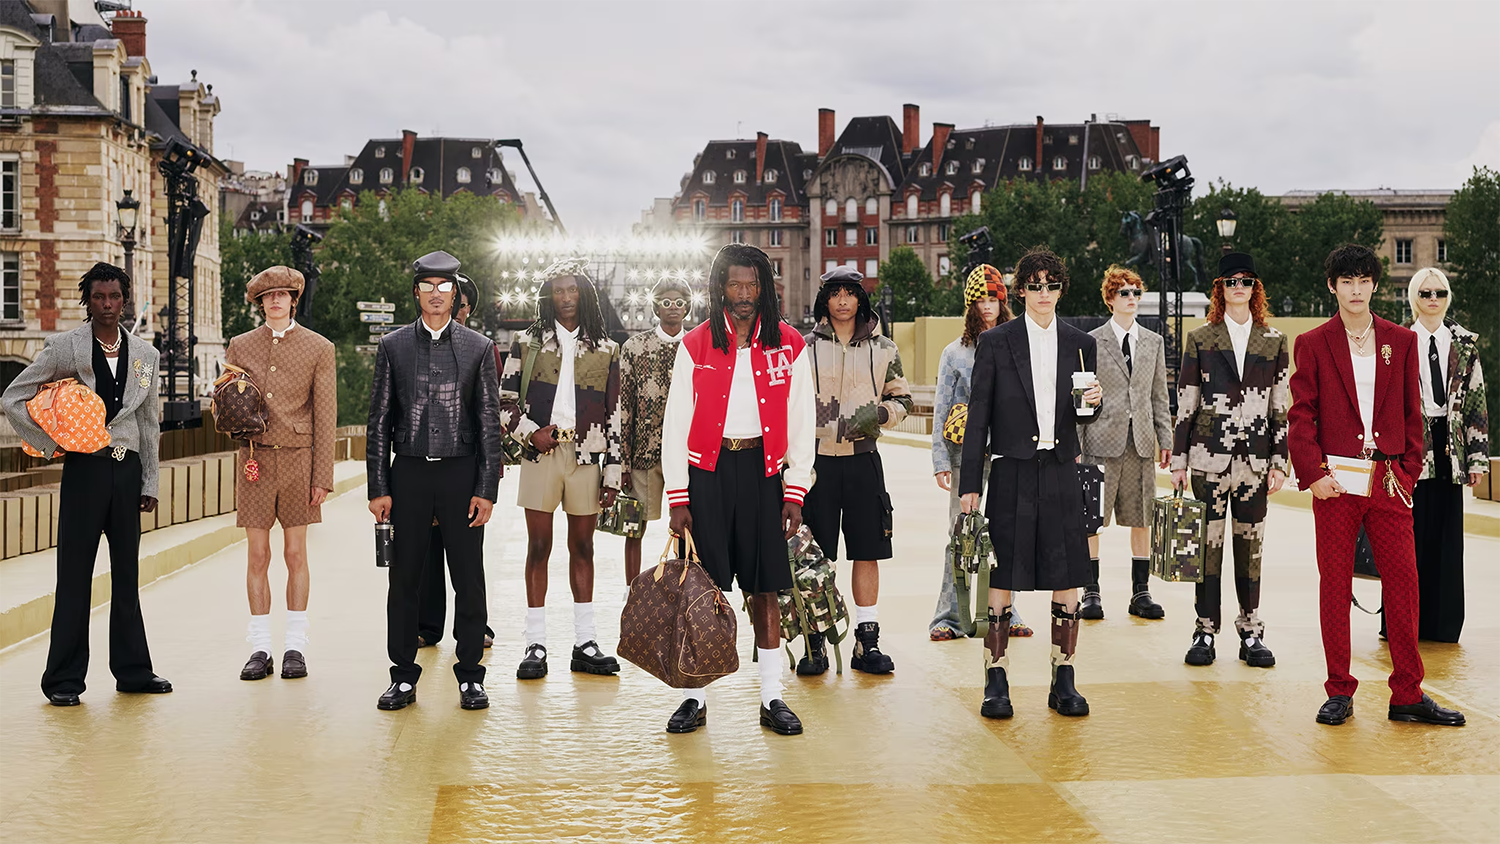 Louis Vuitton to host its first men's prefall show in Hong Kong – can new  creative director Pharrell Williams outdo his debut menswear collection  from Paris Fashion Week?